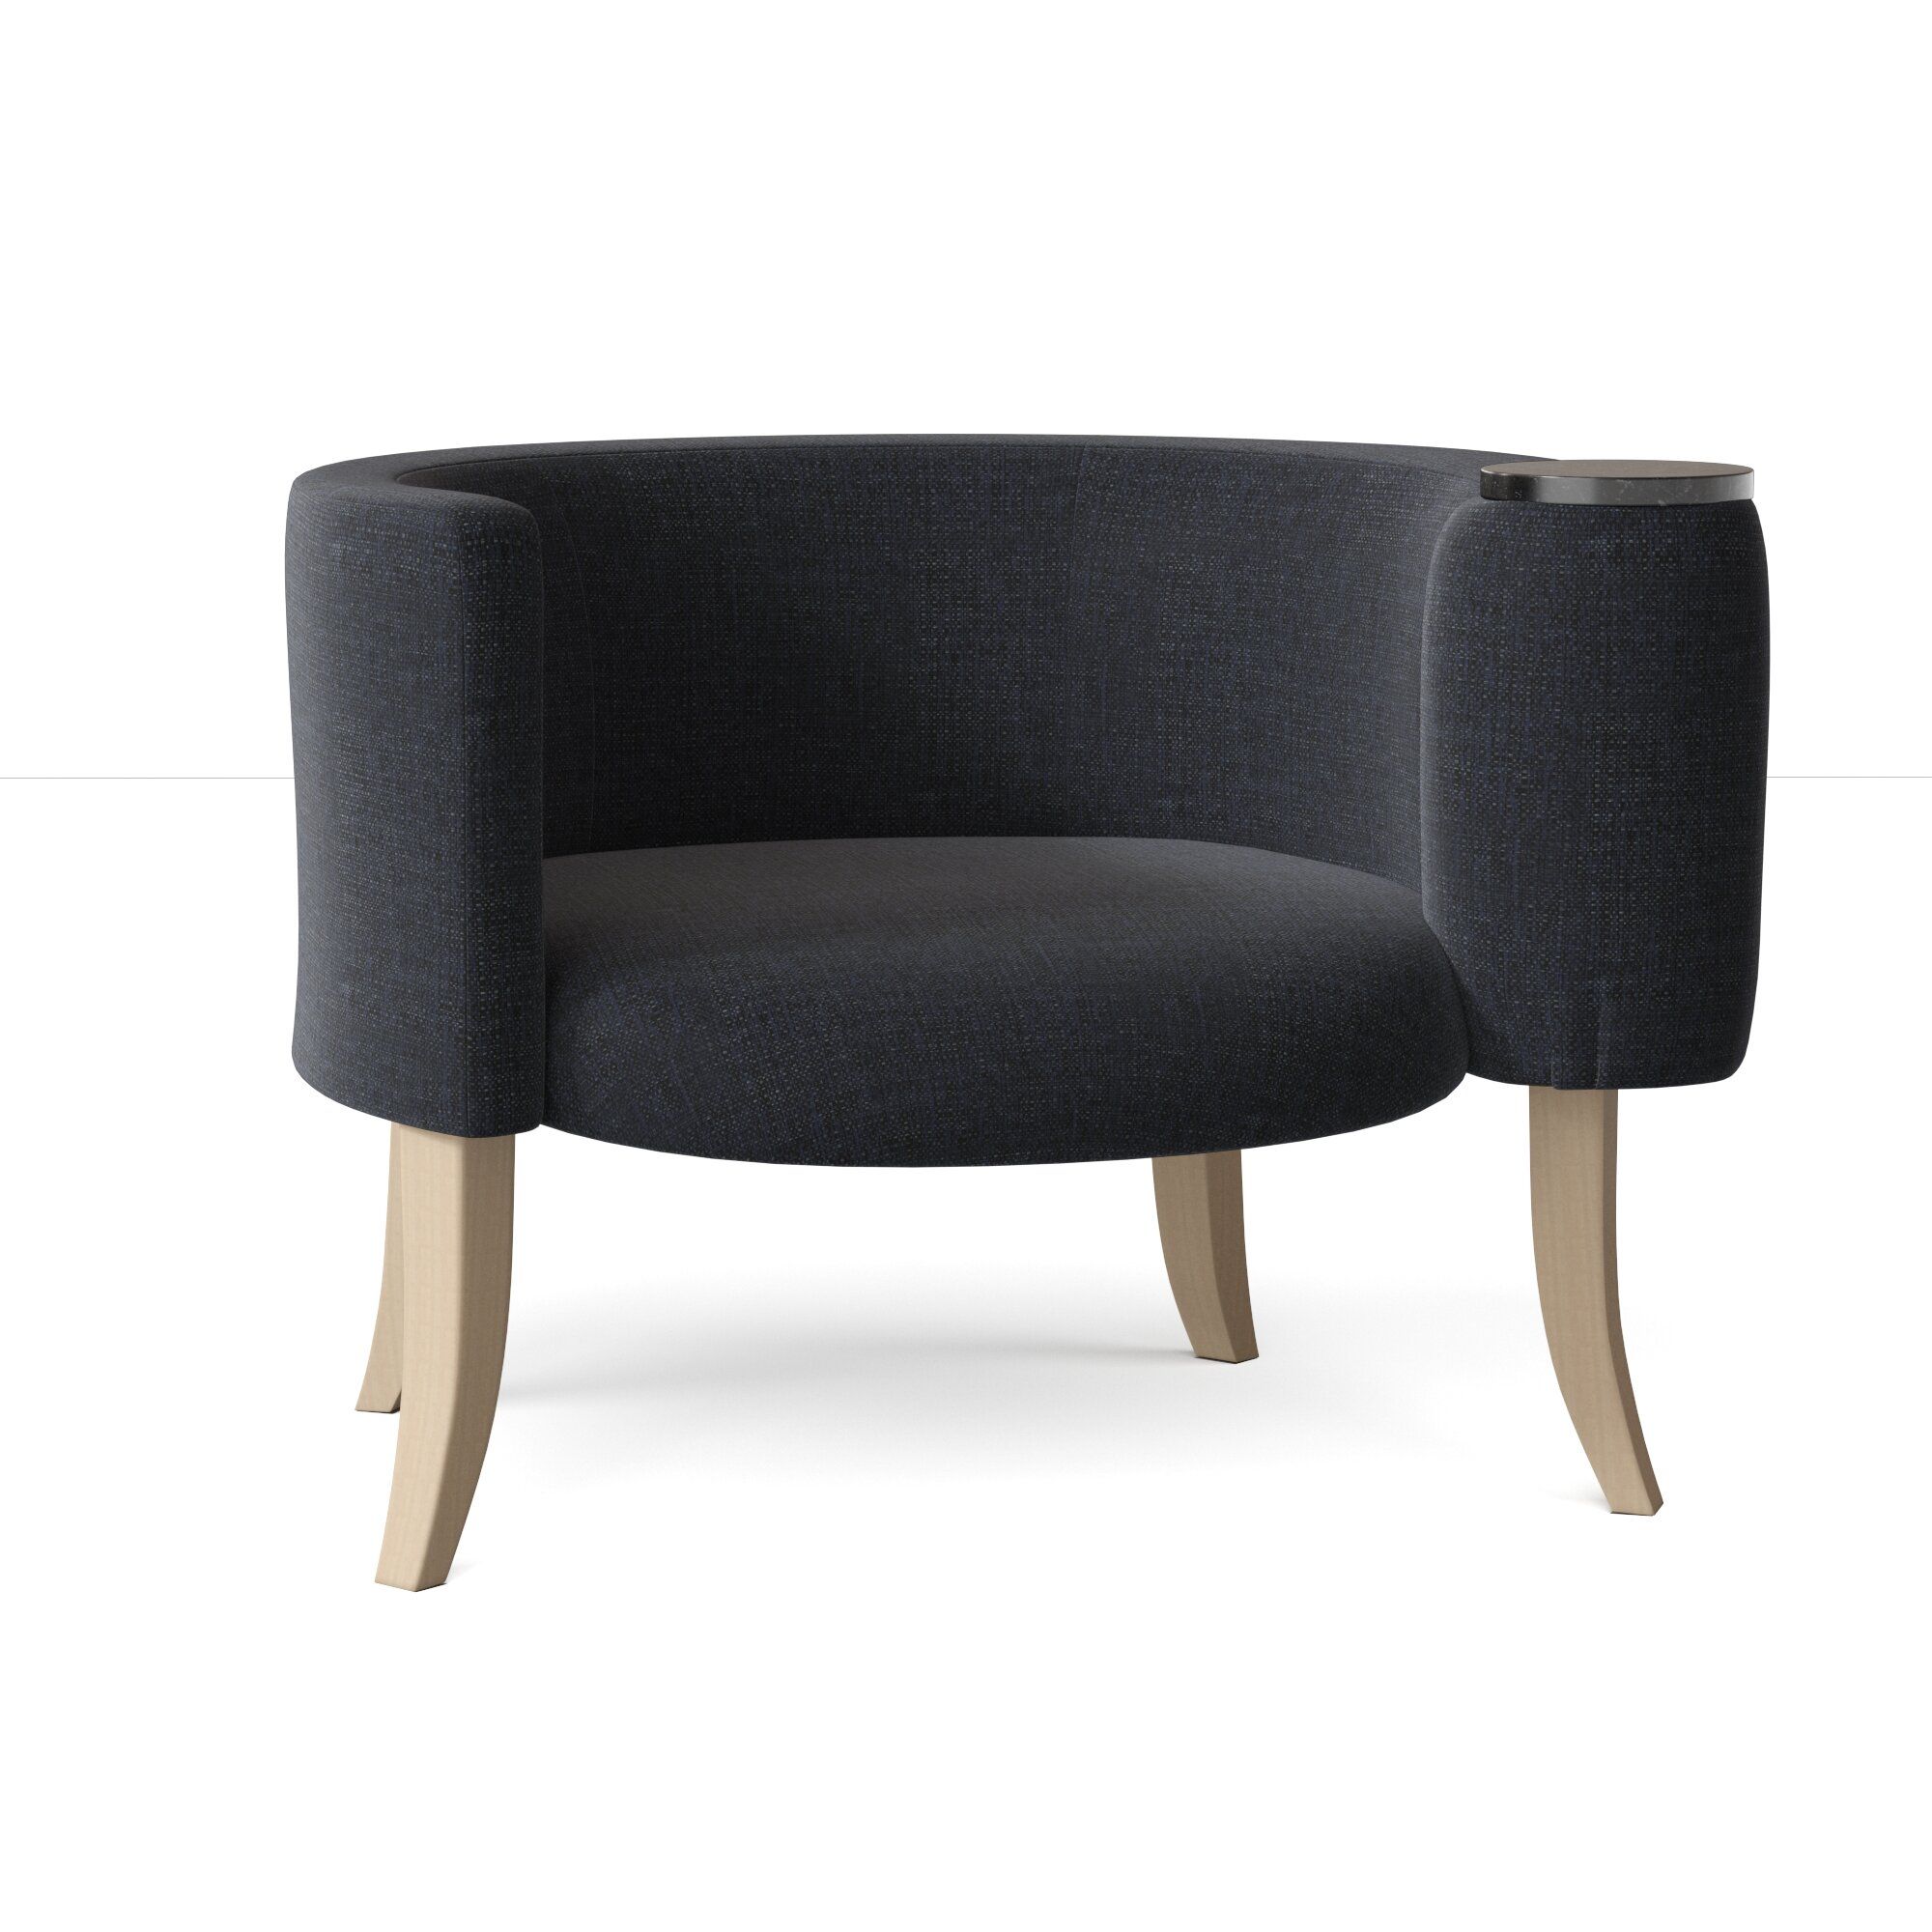 Barrel Accent Chairs On Sale | Wayfair Intended For Giguere Barrel Chairs (View 13 of 15)